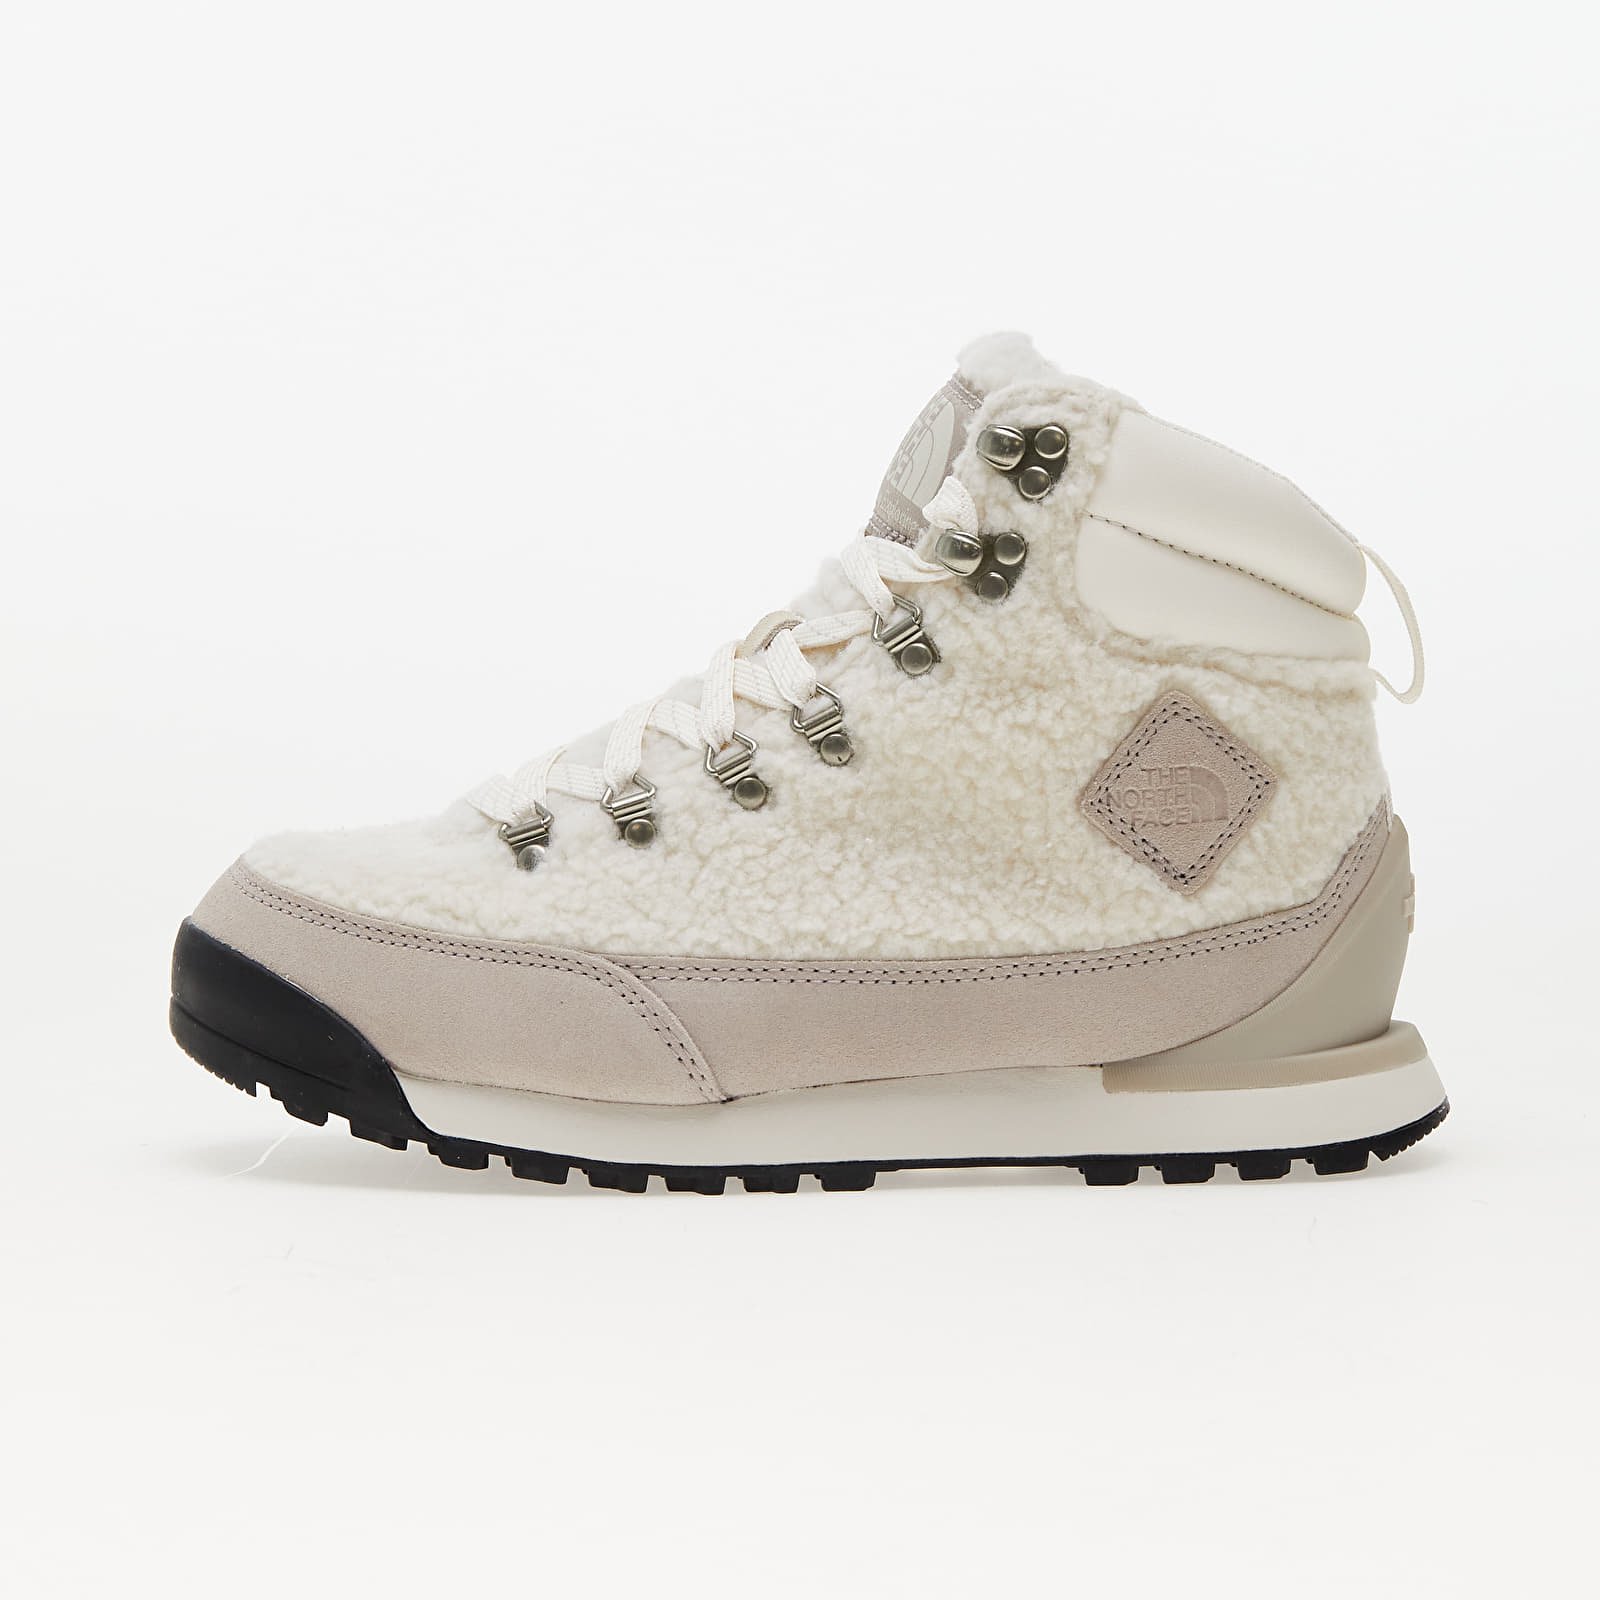 Back-To-Berkeley Iv High Pile White, Women's high-top trainers